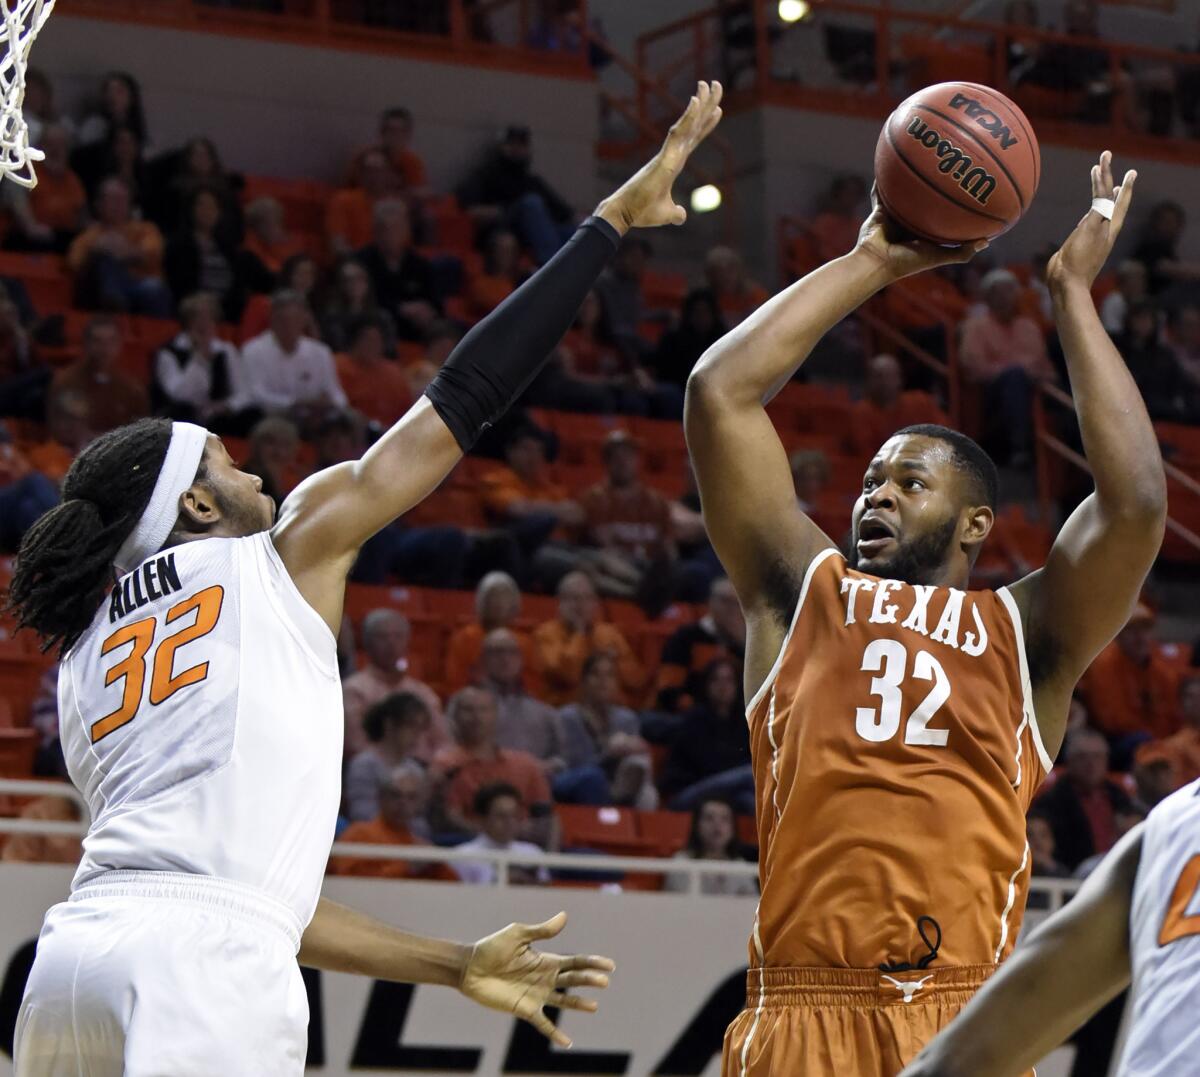 Texas forward Shaquille Cleare takes a shot over Oklahoma State center Anthony Allen Jr. during the second half of a game on March 4.